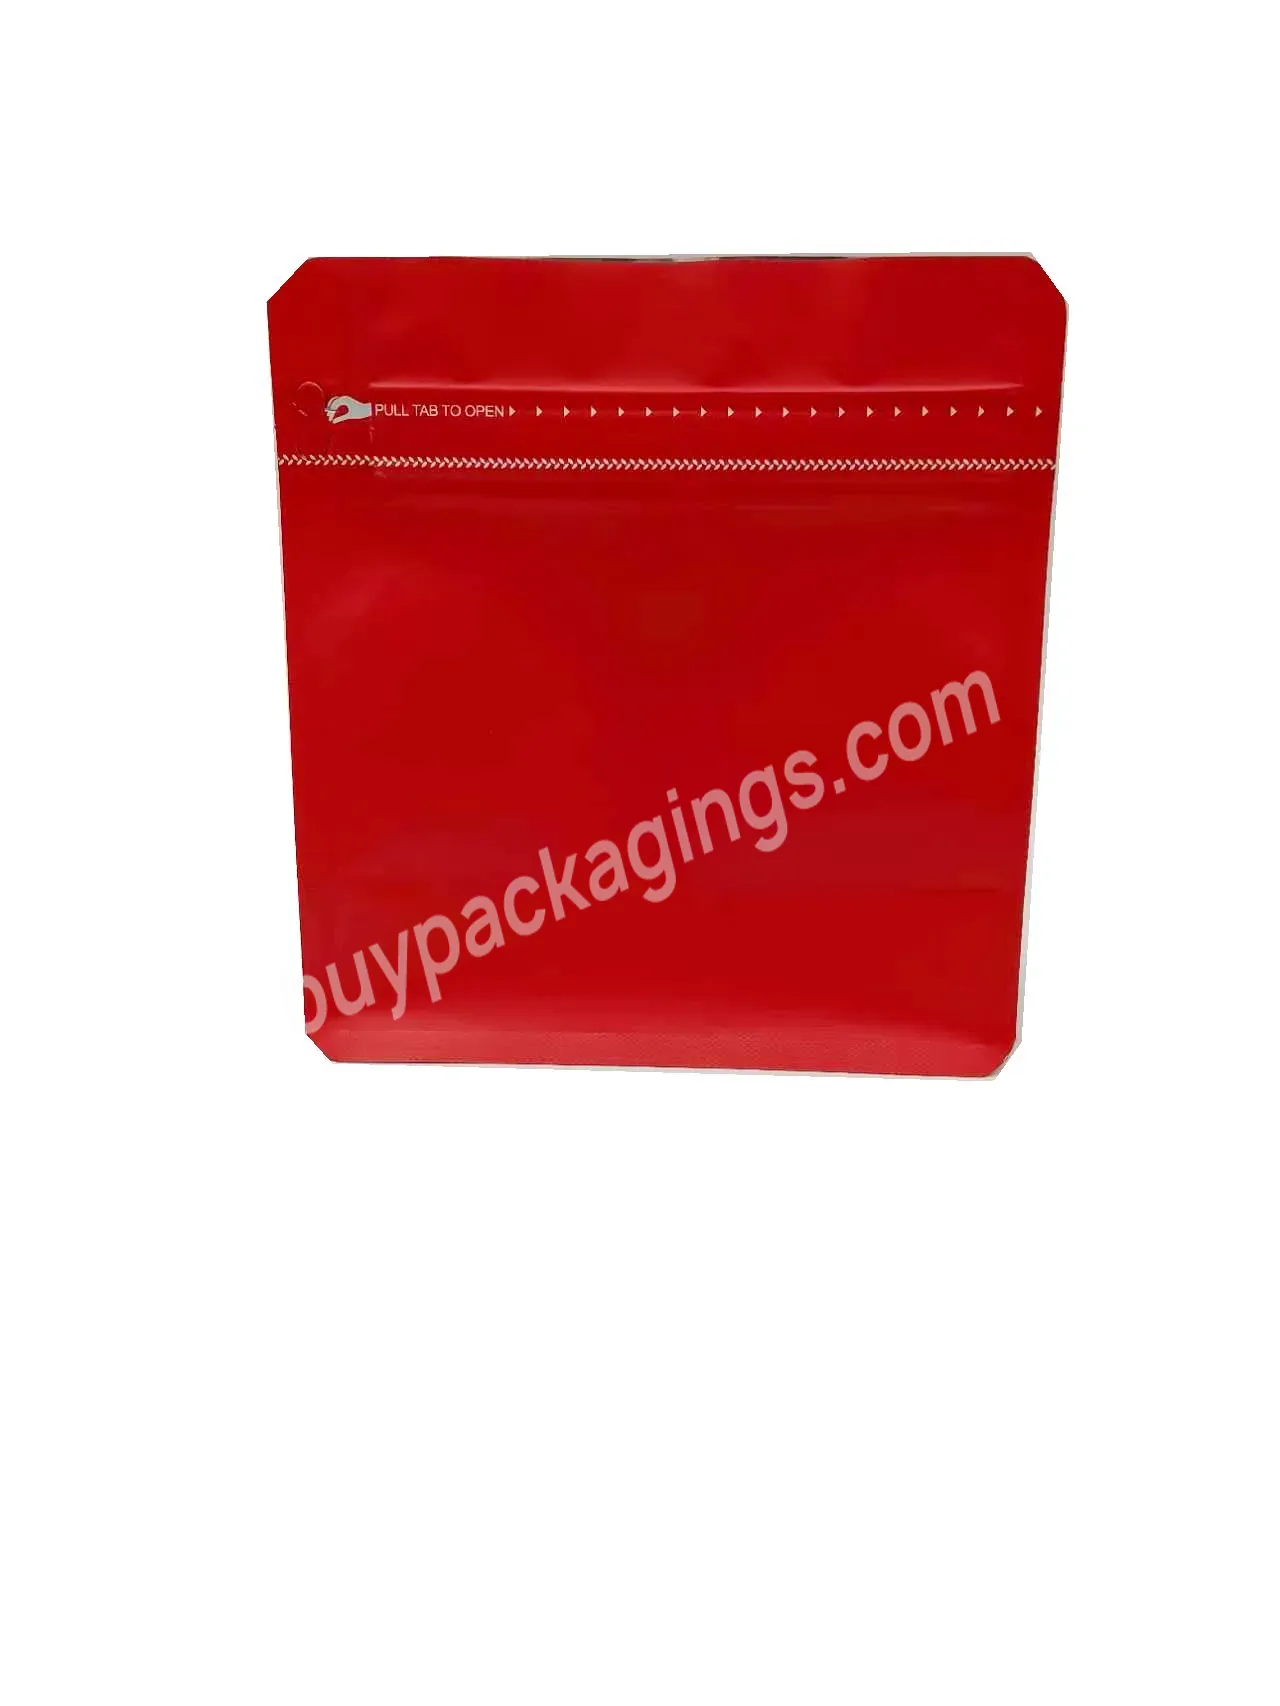 Custom Coffee Packaging Gravure Printing Food Stand Up Pouch Zipper Top Accept Customization Biodegradable Coffeepackaging - Buy 8 Sides Eight Side Seal Flat Bottom Bag,Edible Bags,Custom Coffeepackaging.